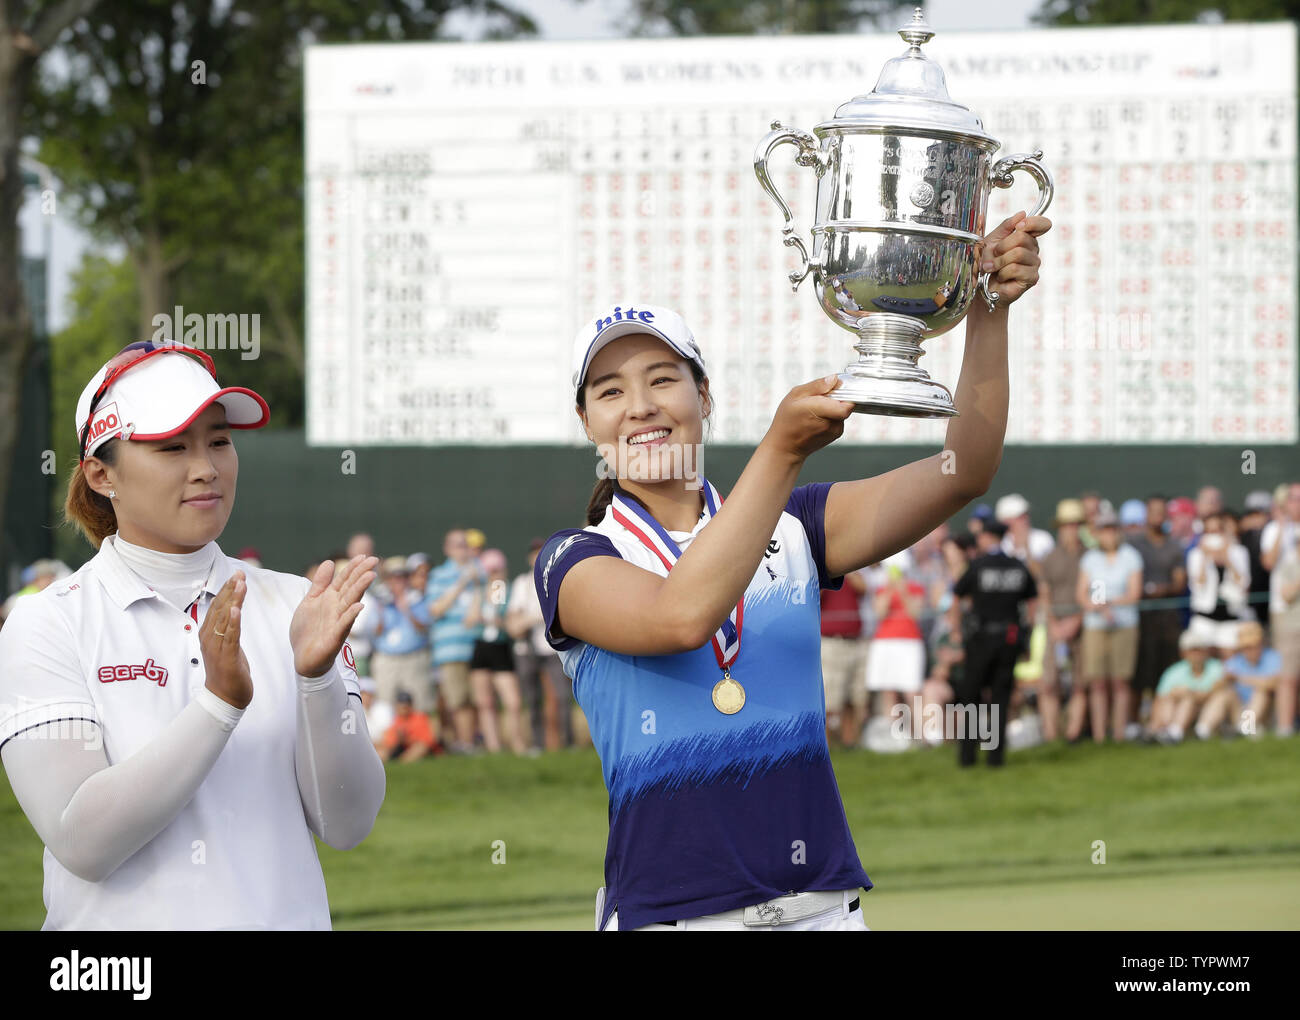 In Gee Chun of Korea holds up the championship trophy standing next to runner up Amy Yang of Korea on the 18th green in the final round of the LPGA U.S. Women's Open Championship at Lancaster Country Club in Lancaster, PA on July 12, 2015. Chun wins the U.S. Women's Open and her first LPGA major championship with a score of 8 under par.     Photo by John Angelillo/UPI Stock Photo